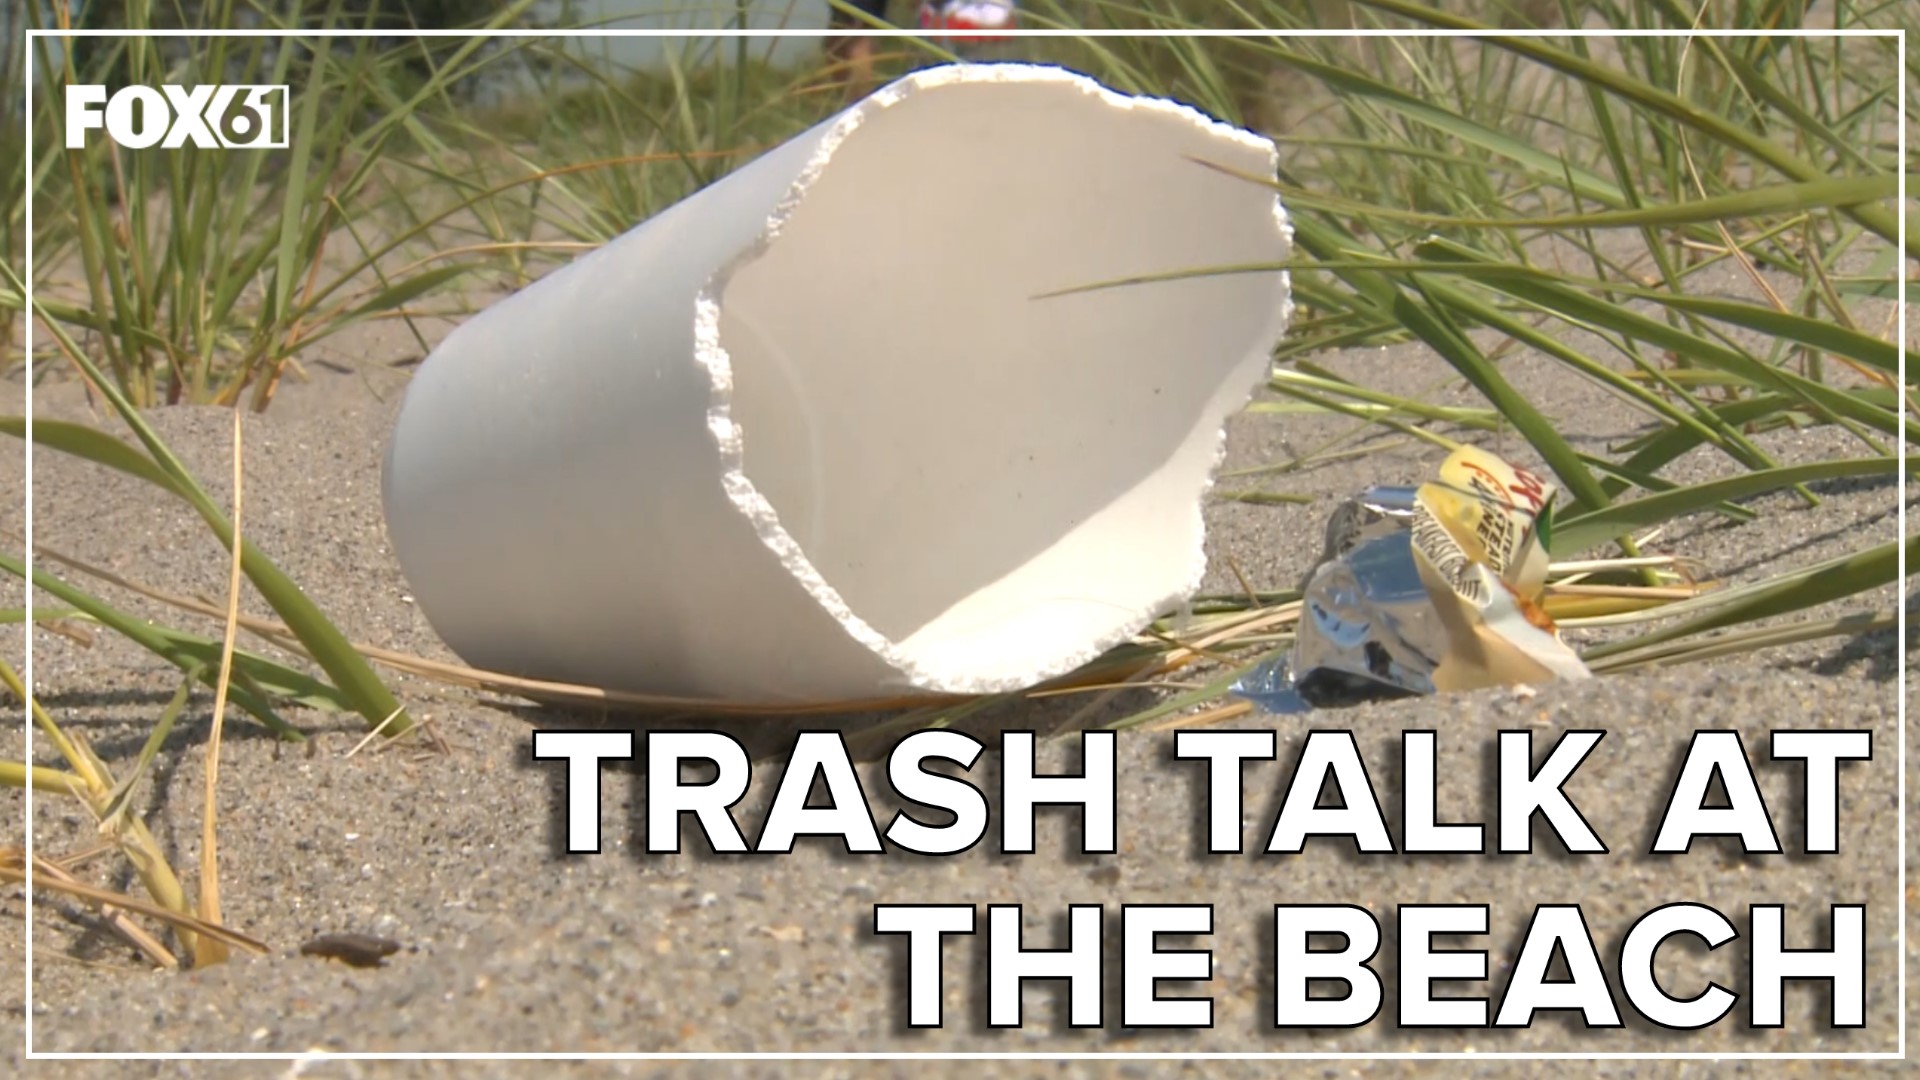 Some beachgoers suggest the problem could be alleviated somewhat if trash cans were placed at the end of each walkway leading onto the beach.